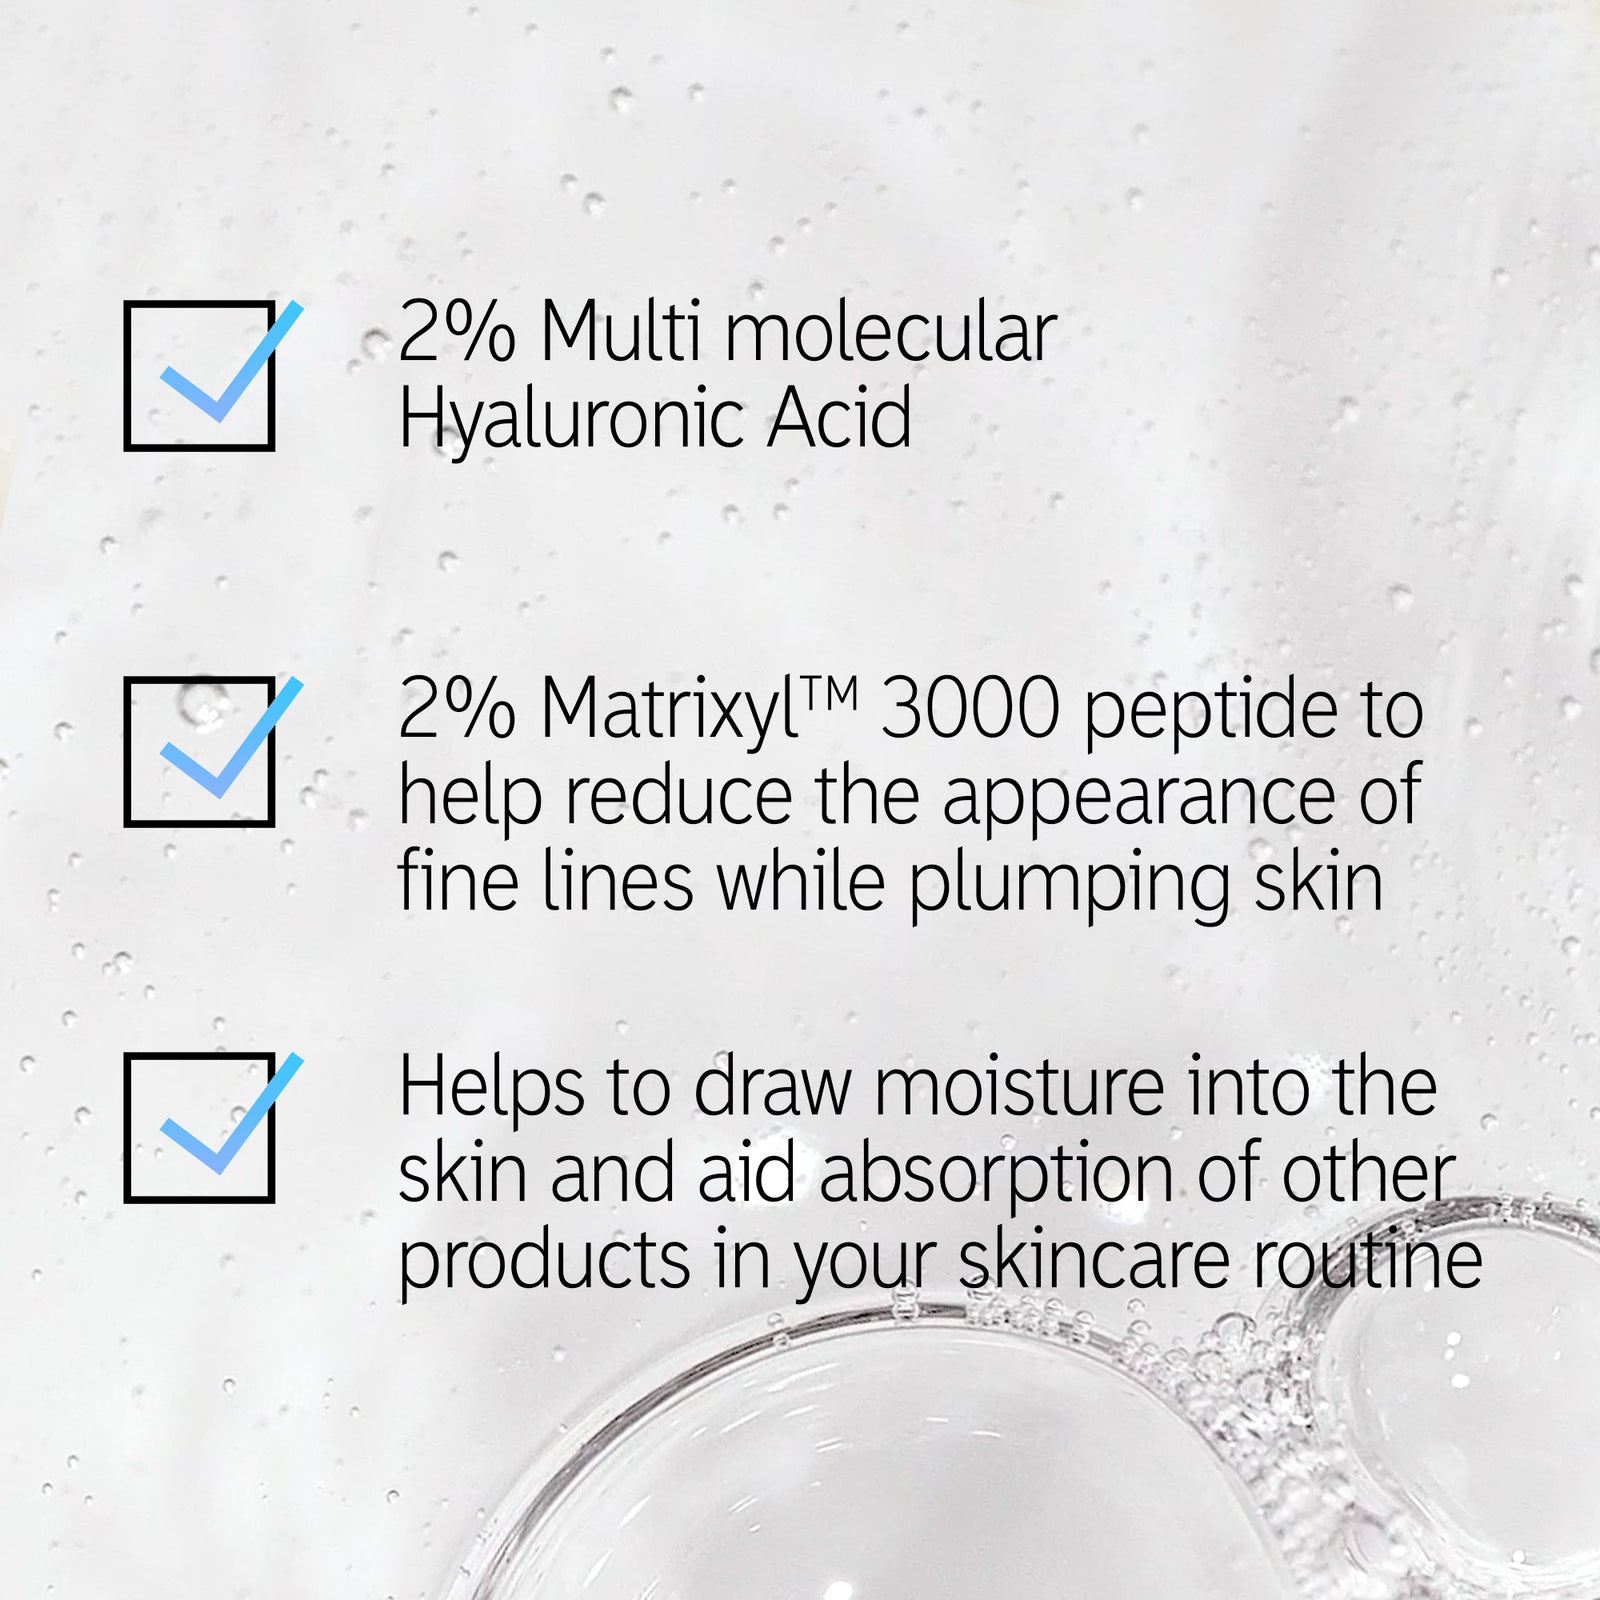 Hyaluronic Acid Serum goop shot with text overlay listing the 3 main benefits of Supersize Hyaluronic Acid Serum. '2% Multi molecular Hyaluronic Acid', '2% MatrixylTM 3000 peptide to help reduce the appearance of fine lines while plumping skin' and 'Helps to draw moisture into the skin and aid absorbtion of other products in your routine'